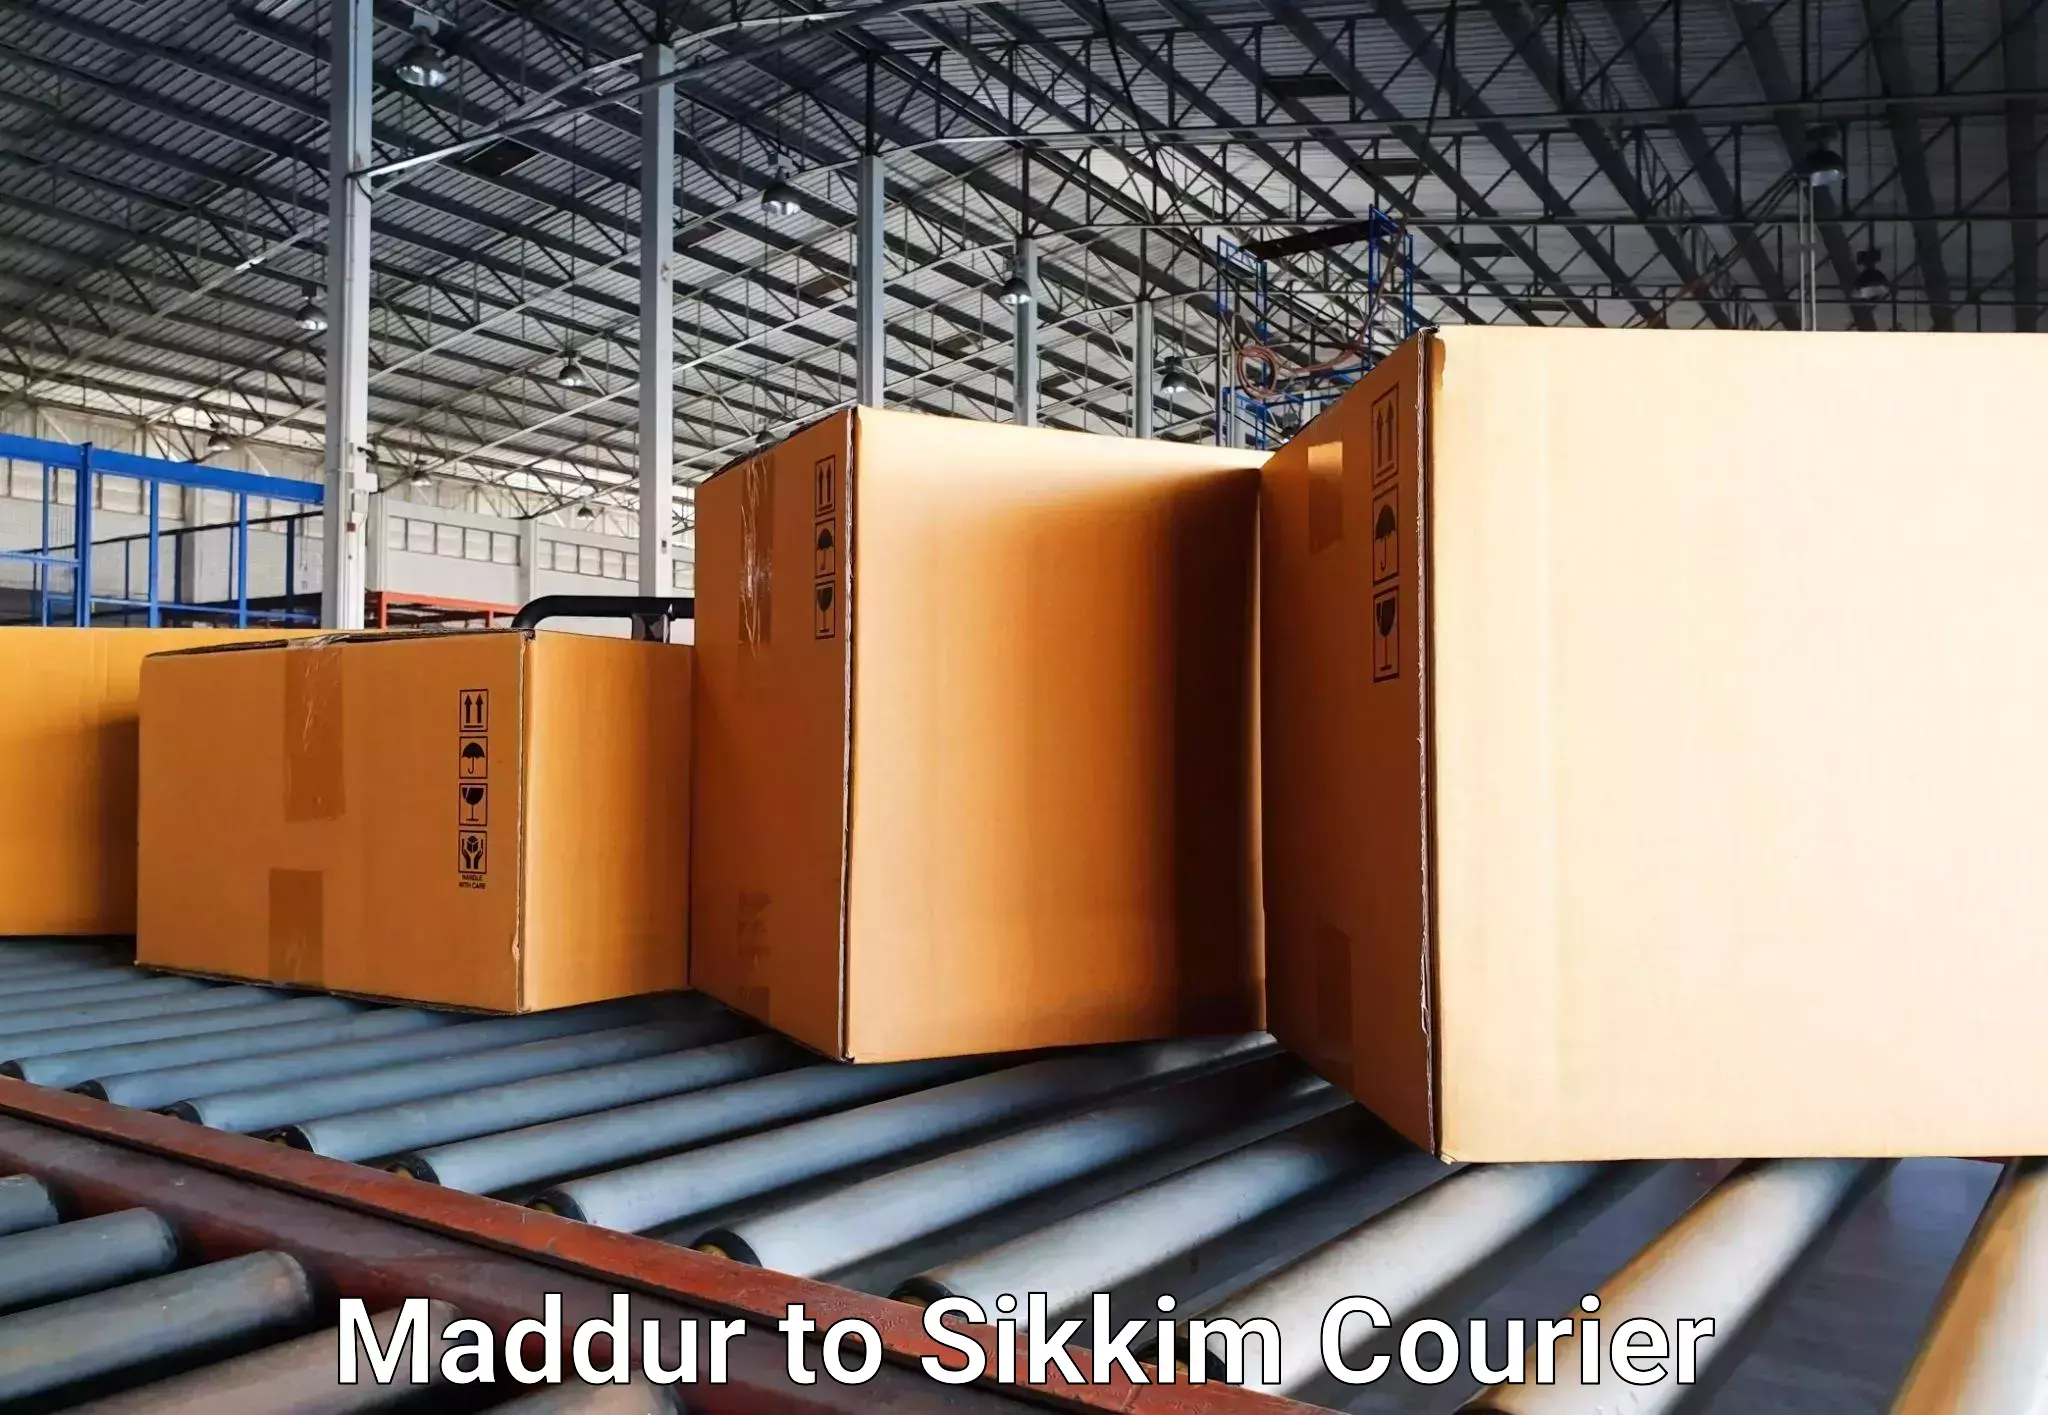 Luggage transport consulting Maddur to Sikkim